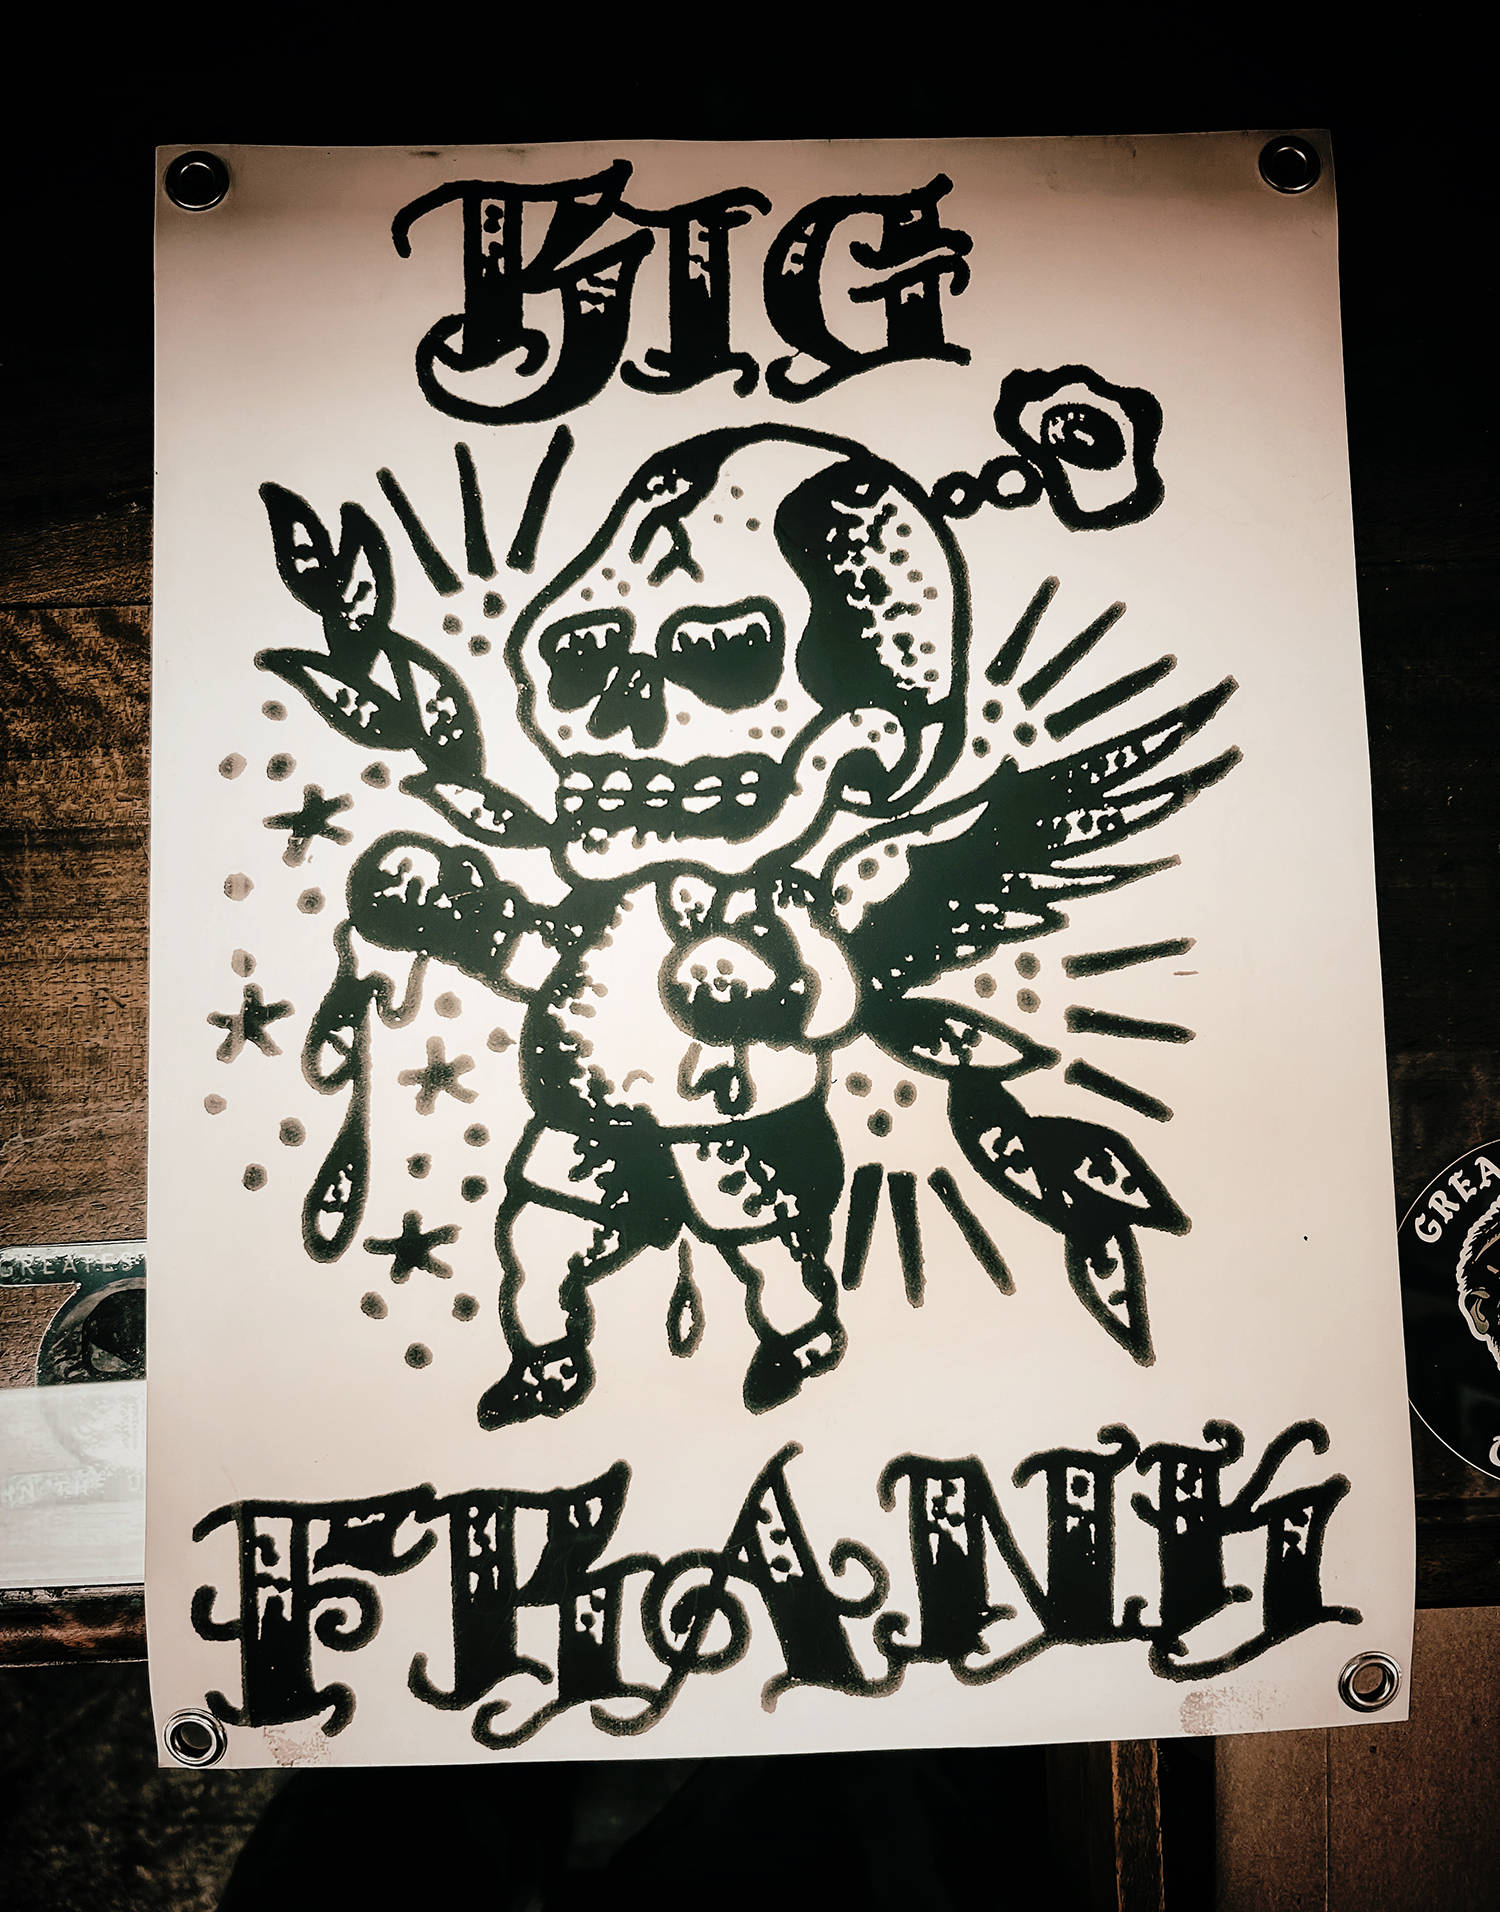 booth banner of Big Frank with boxer baby skull